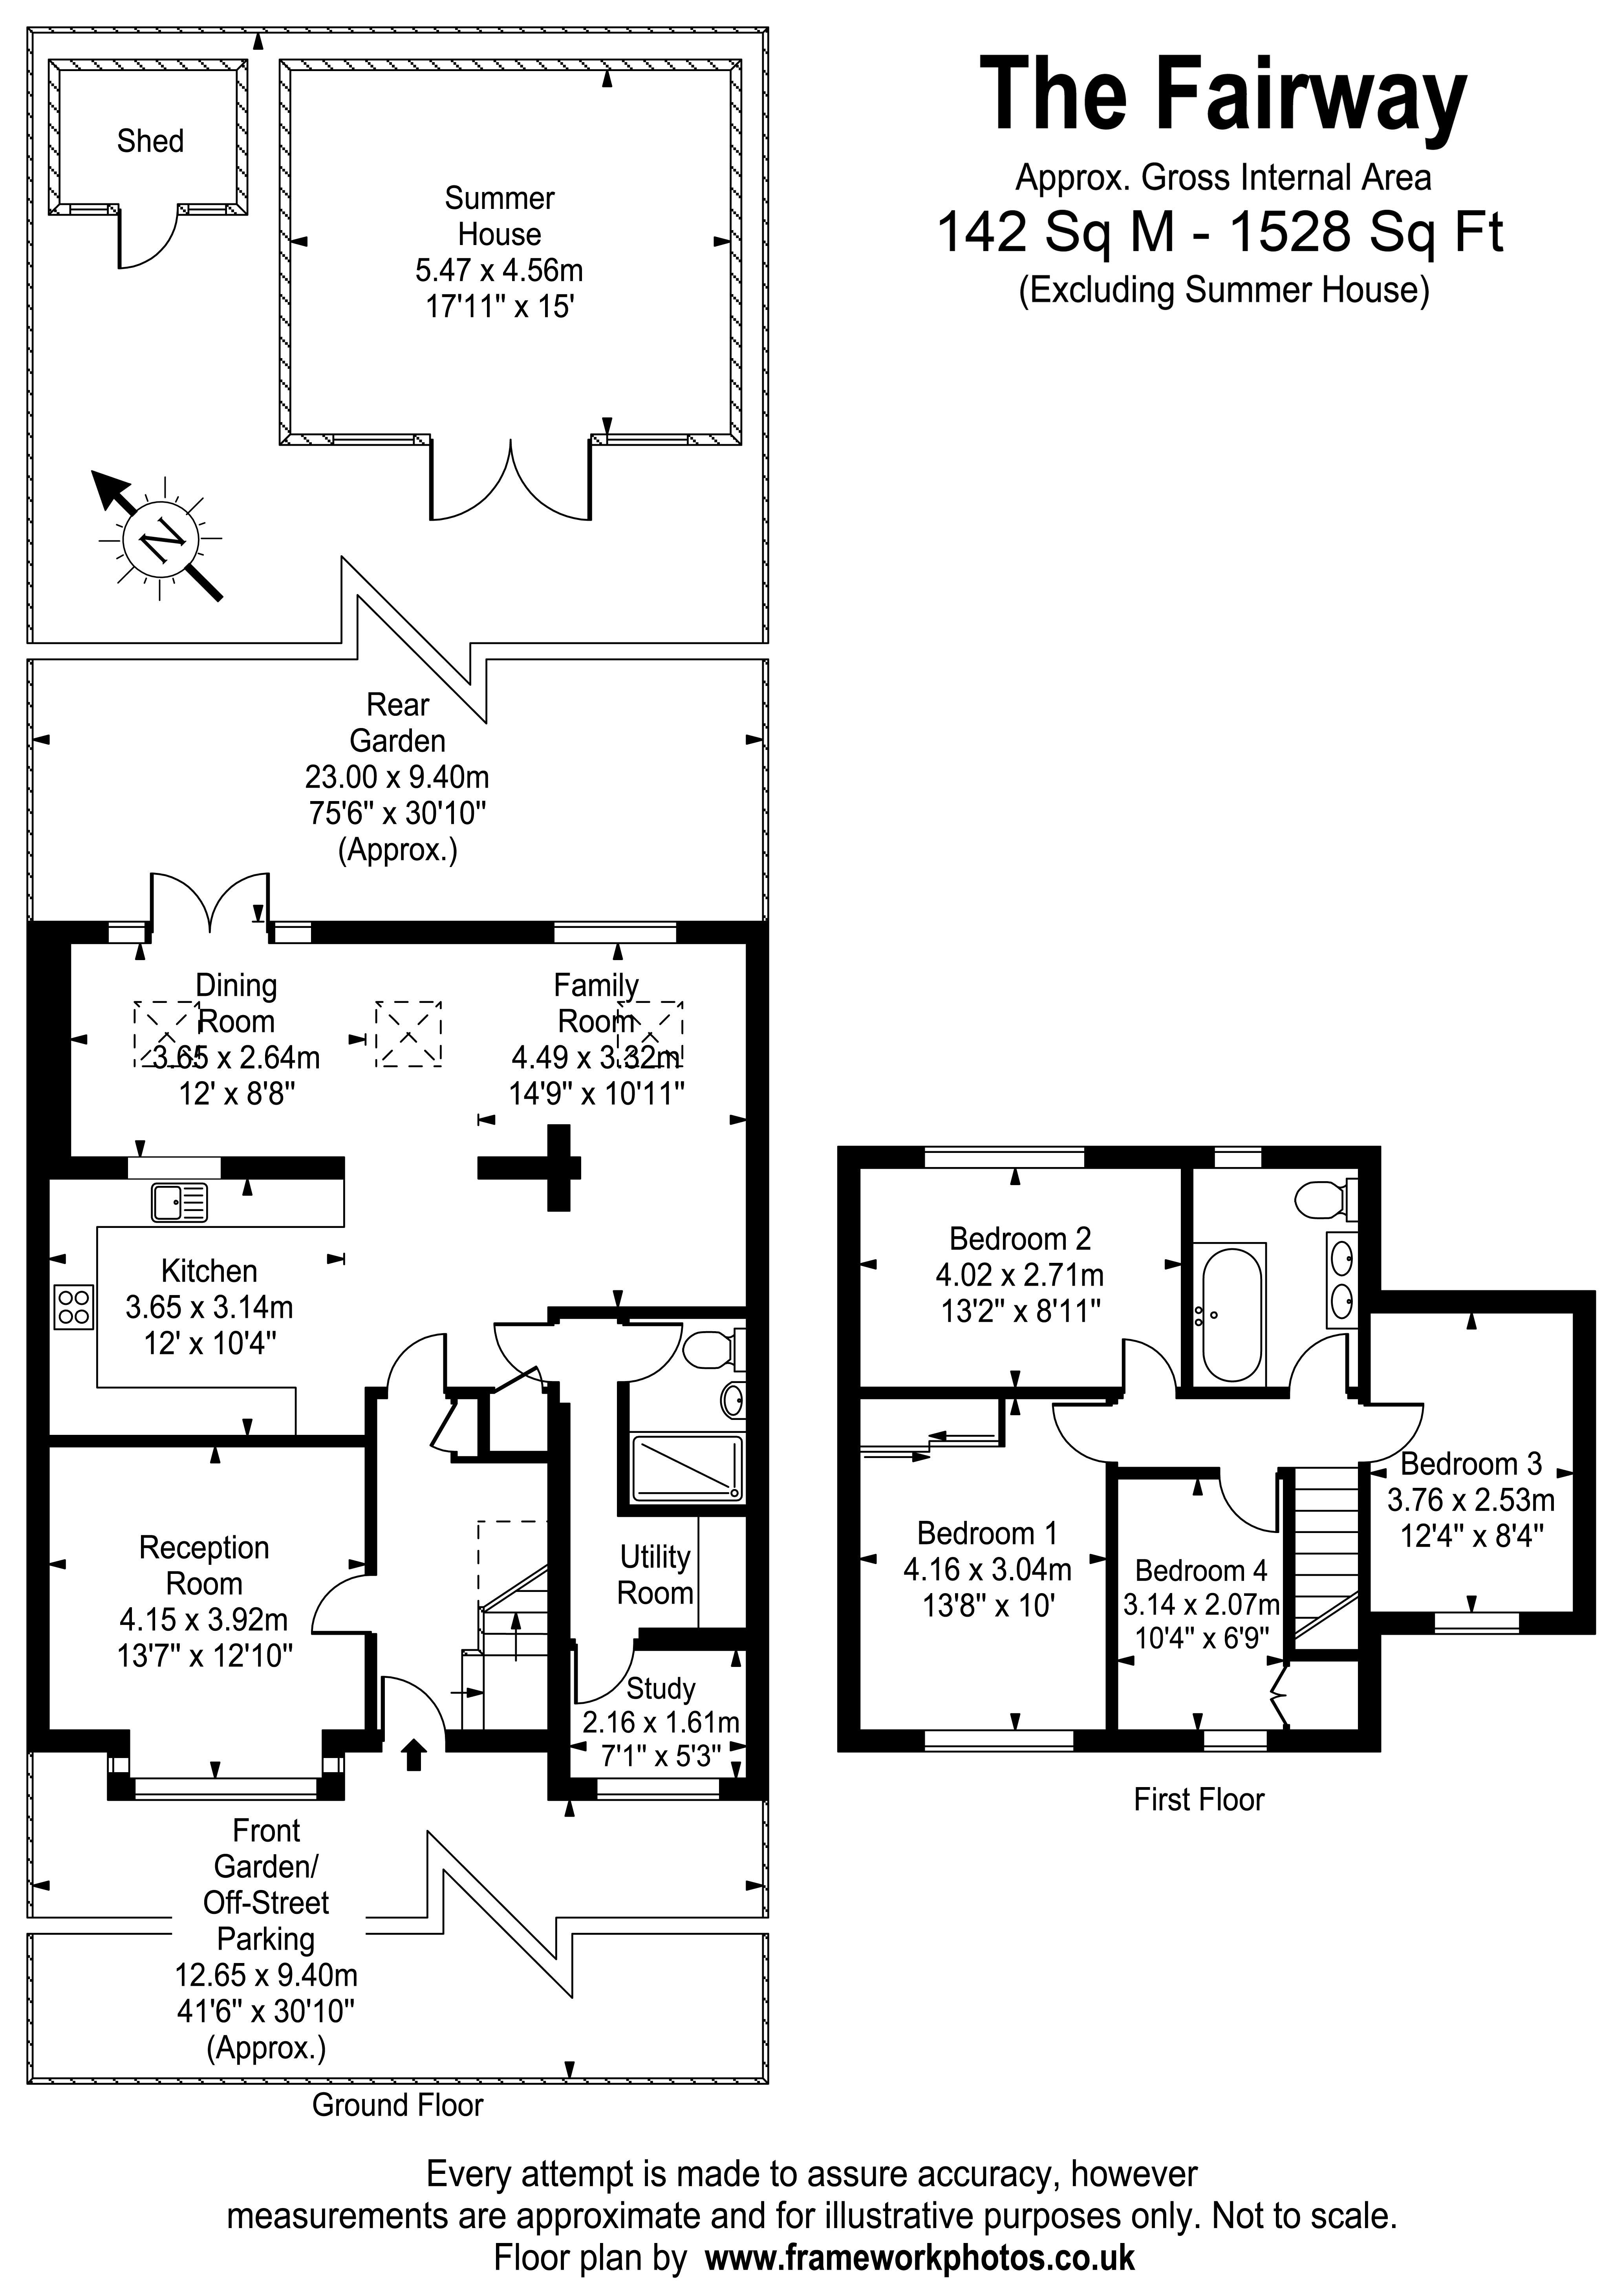 Floorplans For The Fairway, West Molesey